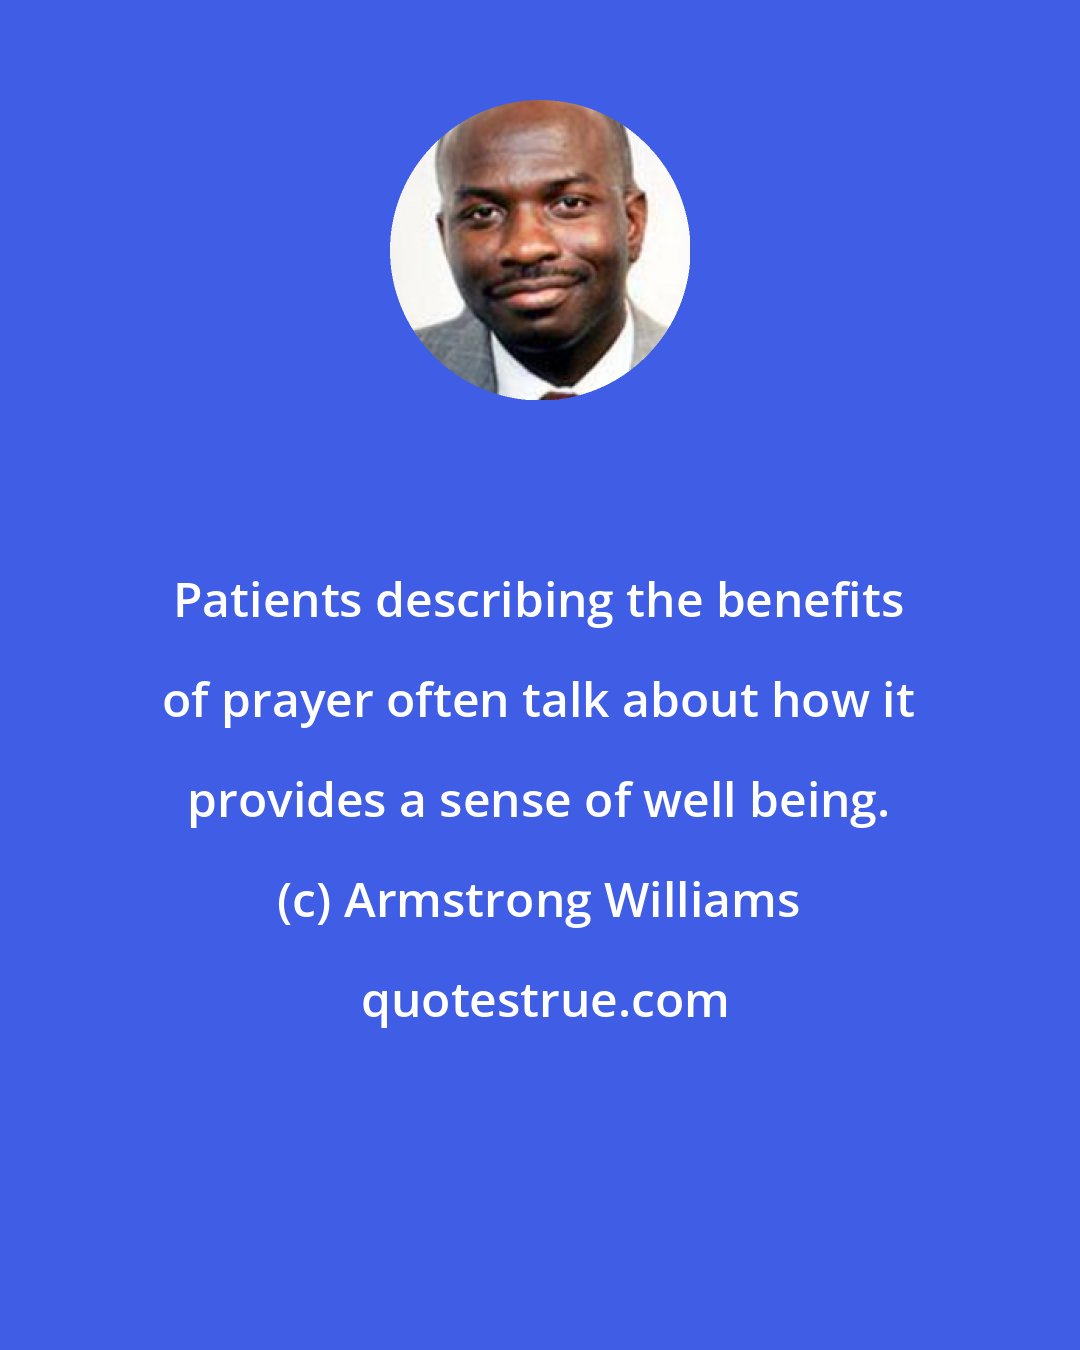 Armstrong Williams: Patients describing the benefits of prayer often talk about how it provides a sense of well being.